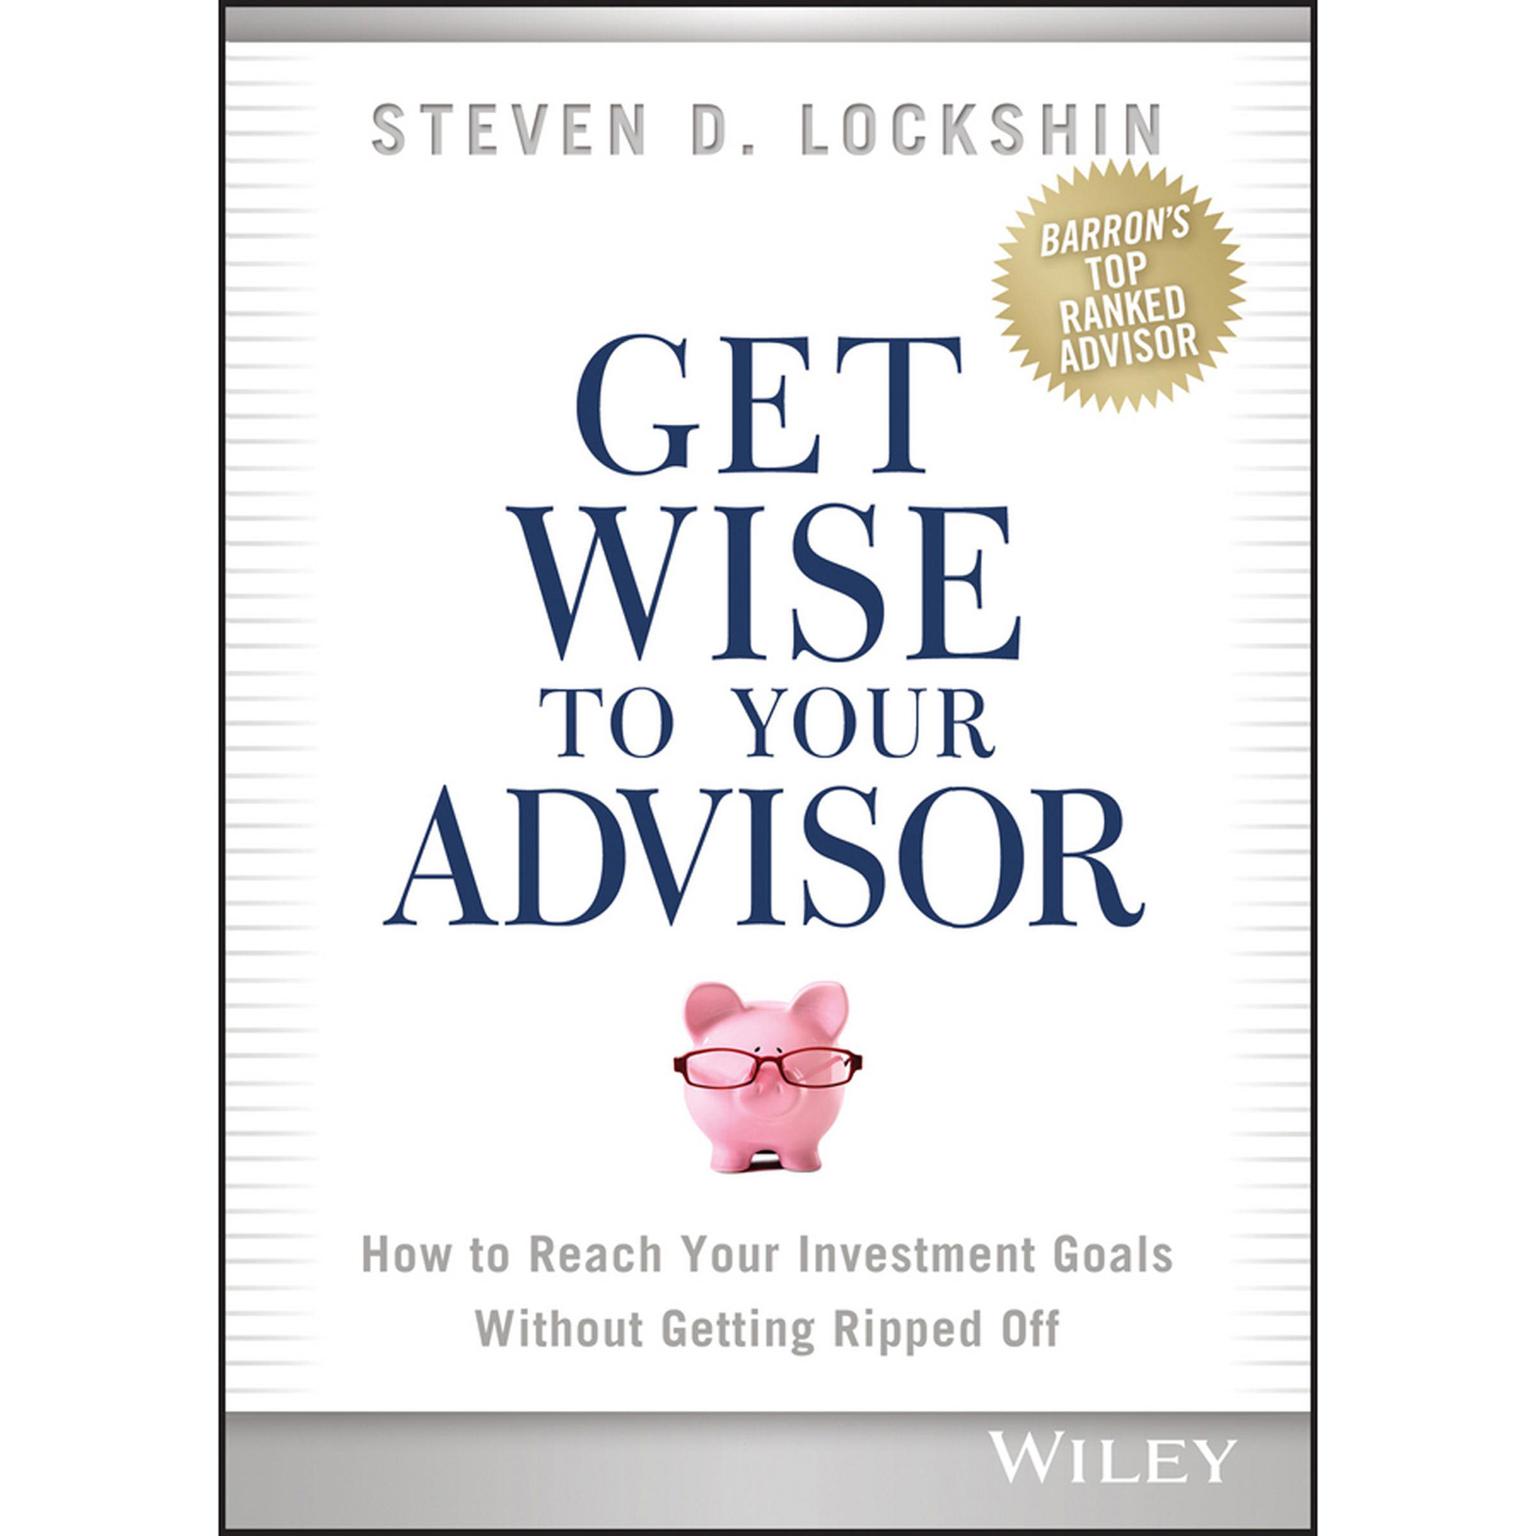 Get Wise to Your Advisor: How to Reach Your Investment Goals Without Getting Ripped Off Audiobook, by Steven D. Lockshin